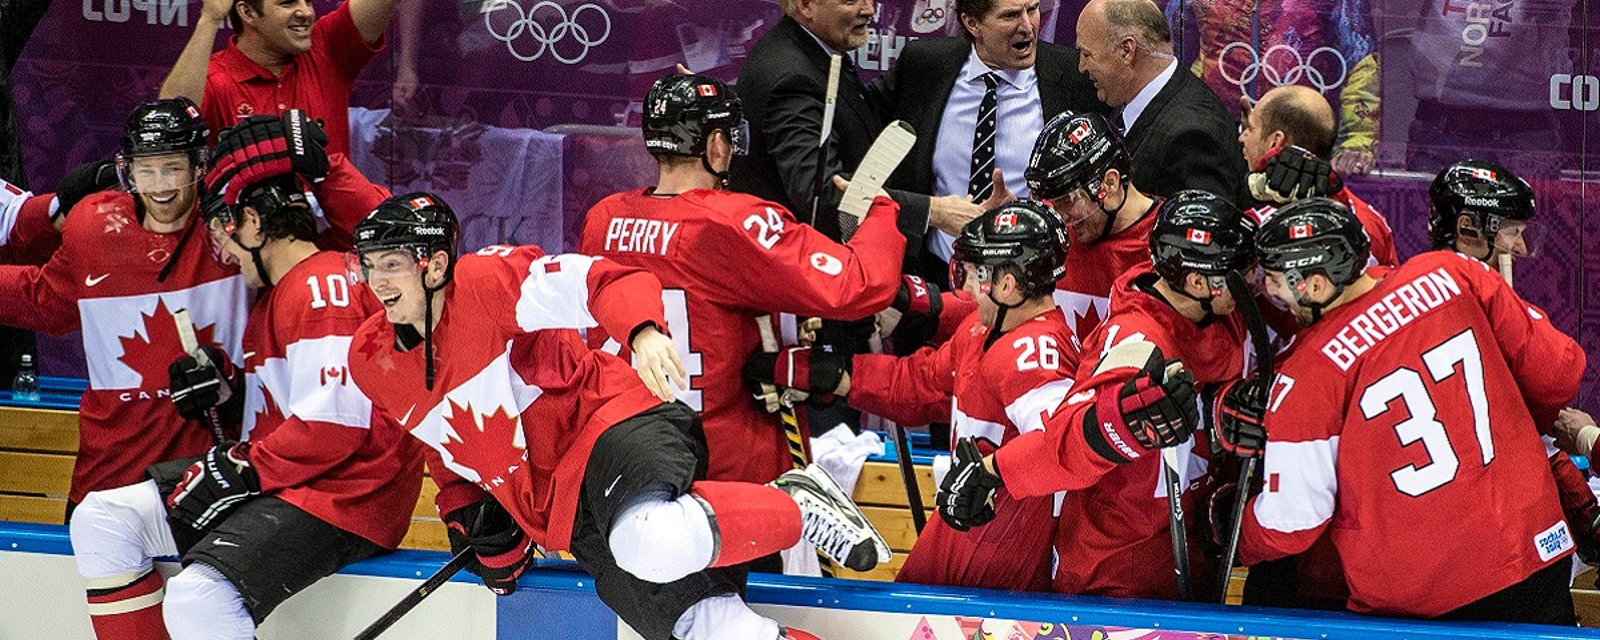 Positive signs regarding the NHL and the Olympic decision.